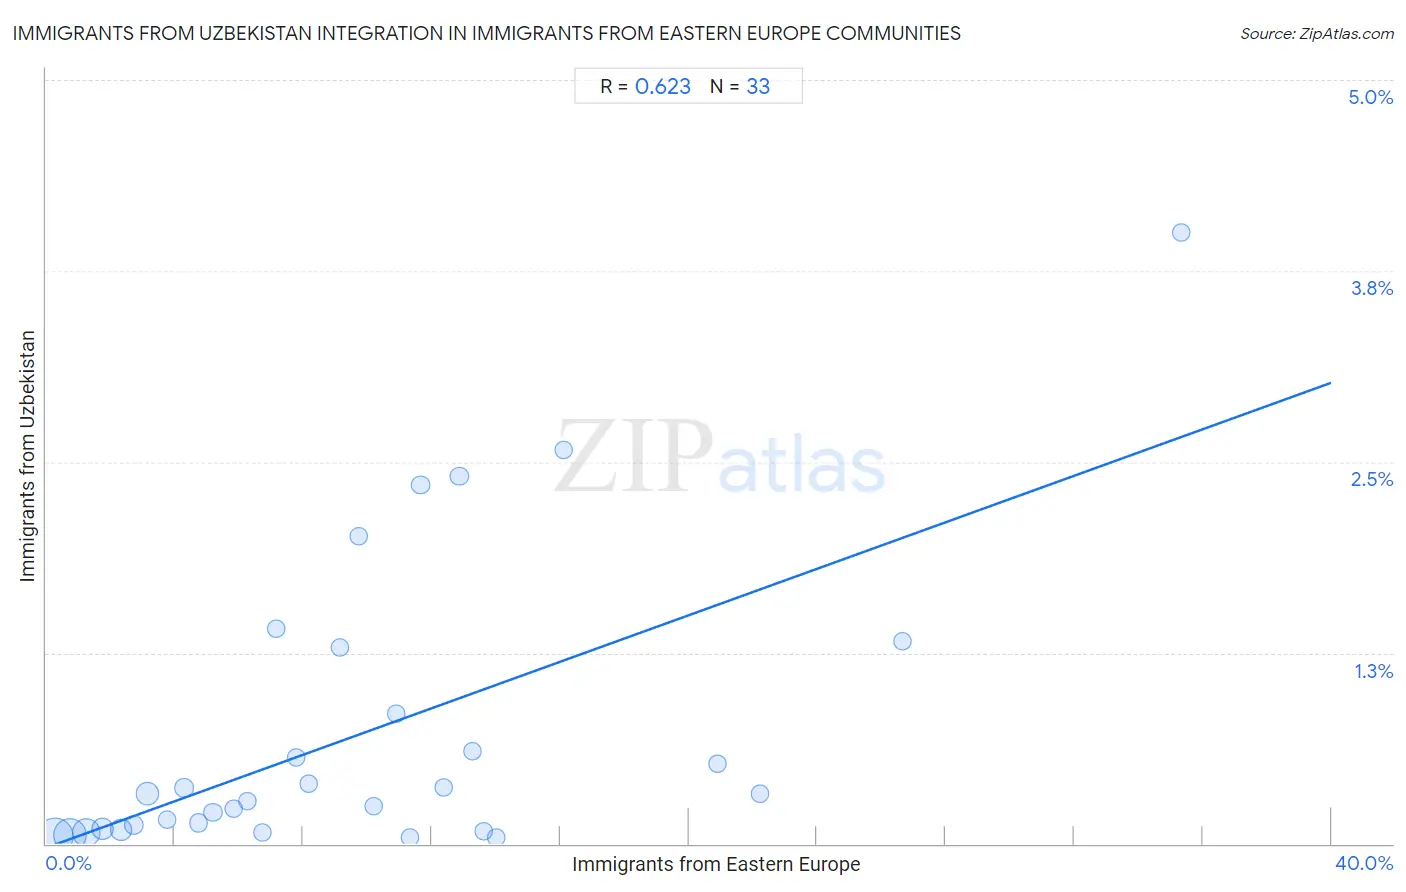 Immigrants from Eastern Europe Integration in Immigrants from Uzbekistan Communities